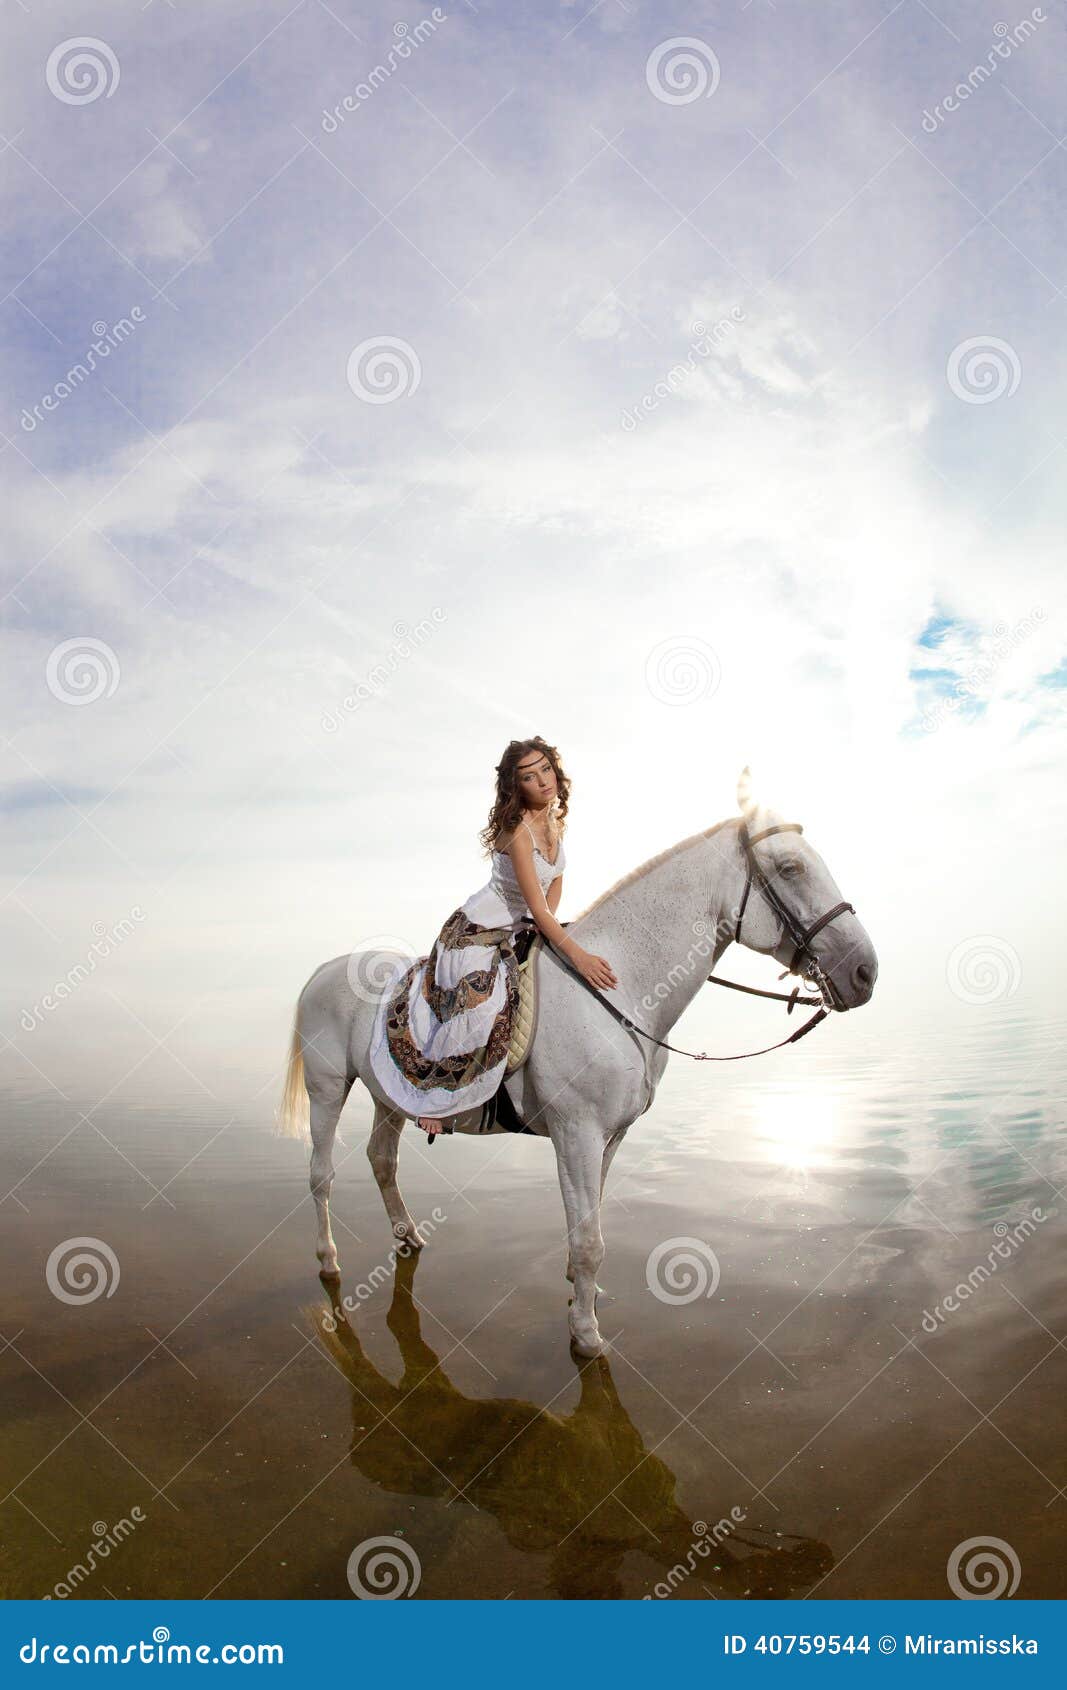 young woman on a horse. horseback rider, woman riding horse on b